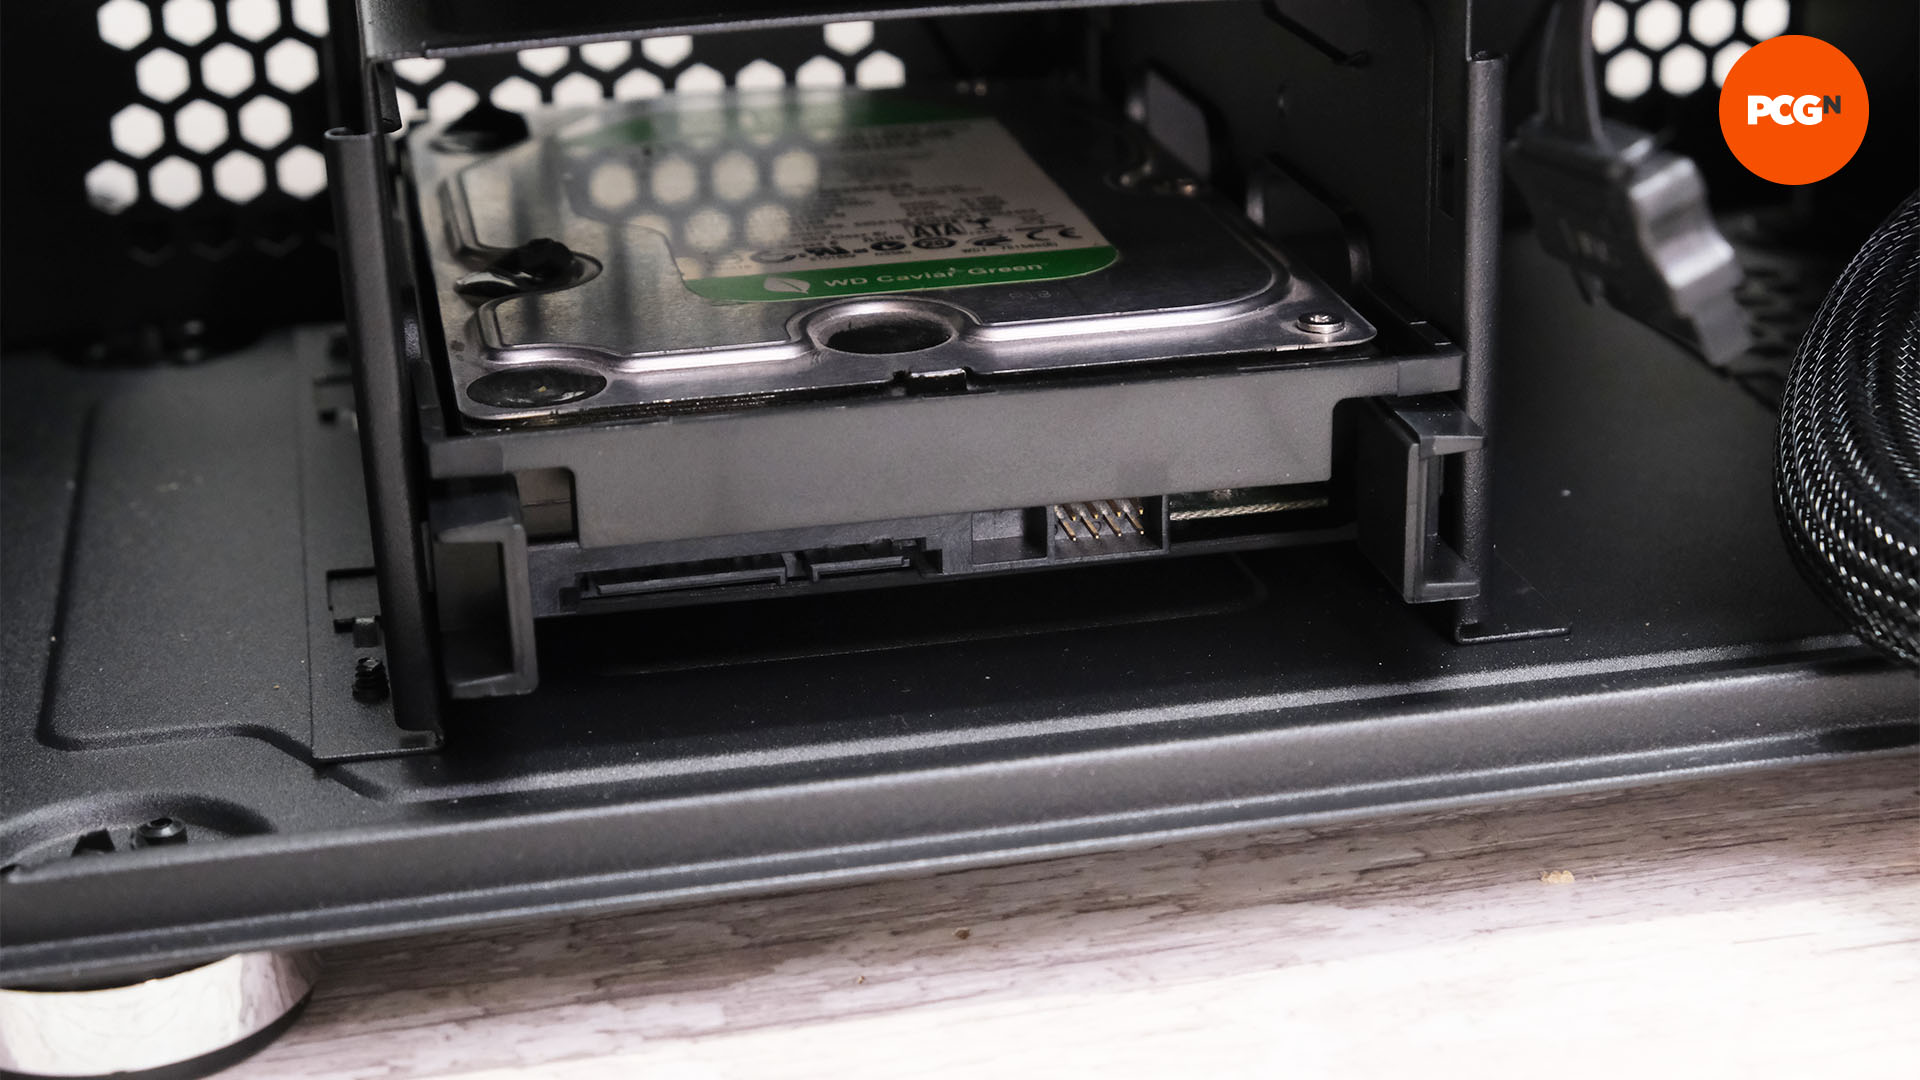 How to build a gaming PC: Install 3.5-inch hard drive in case